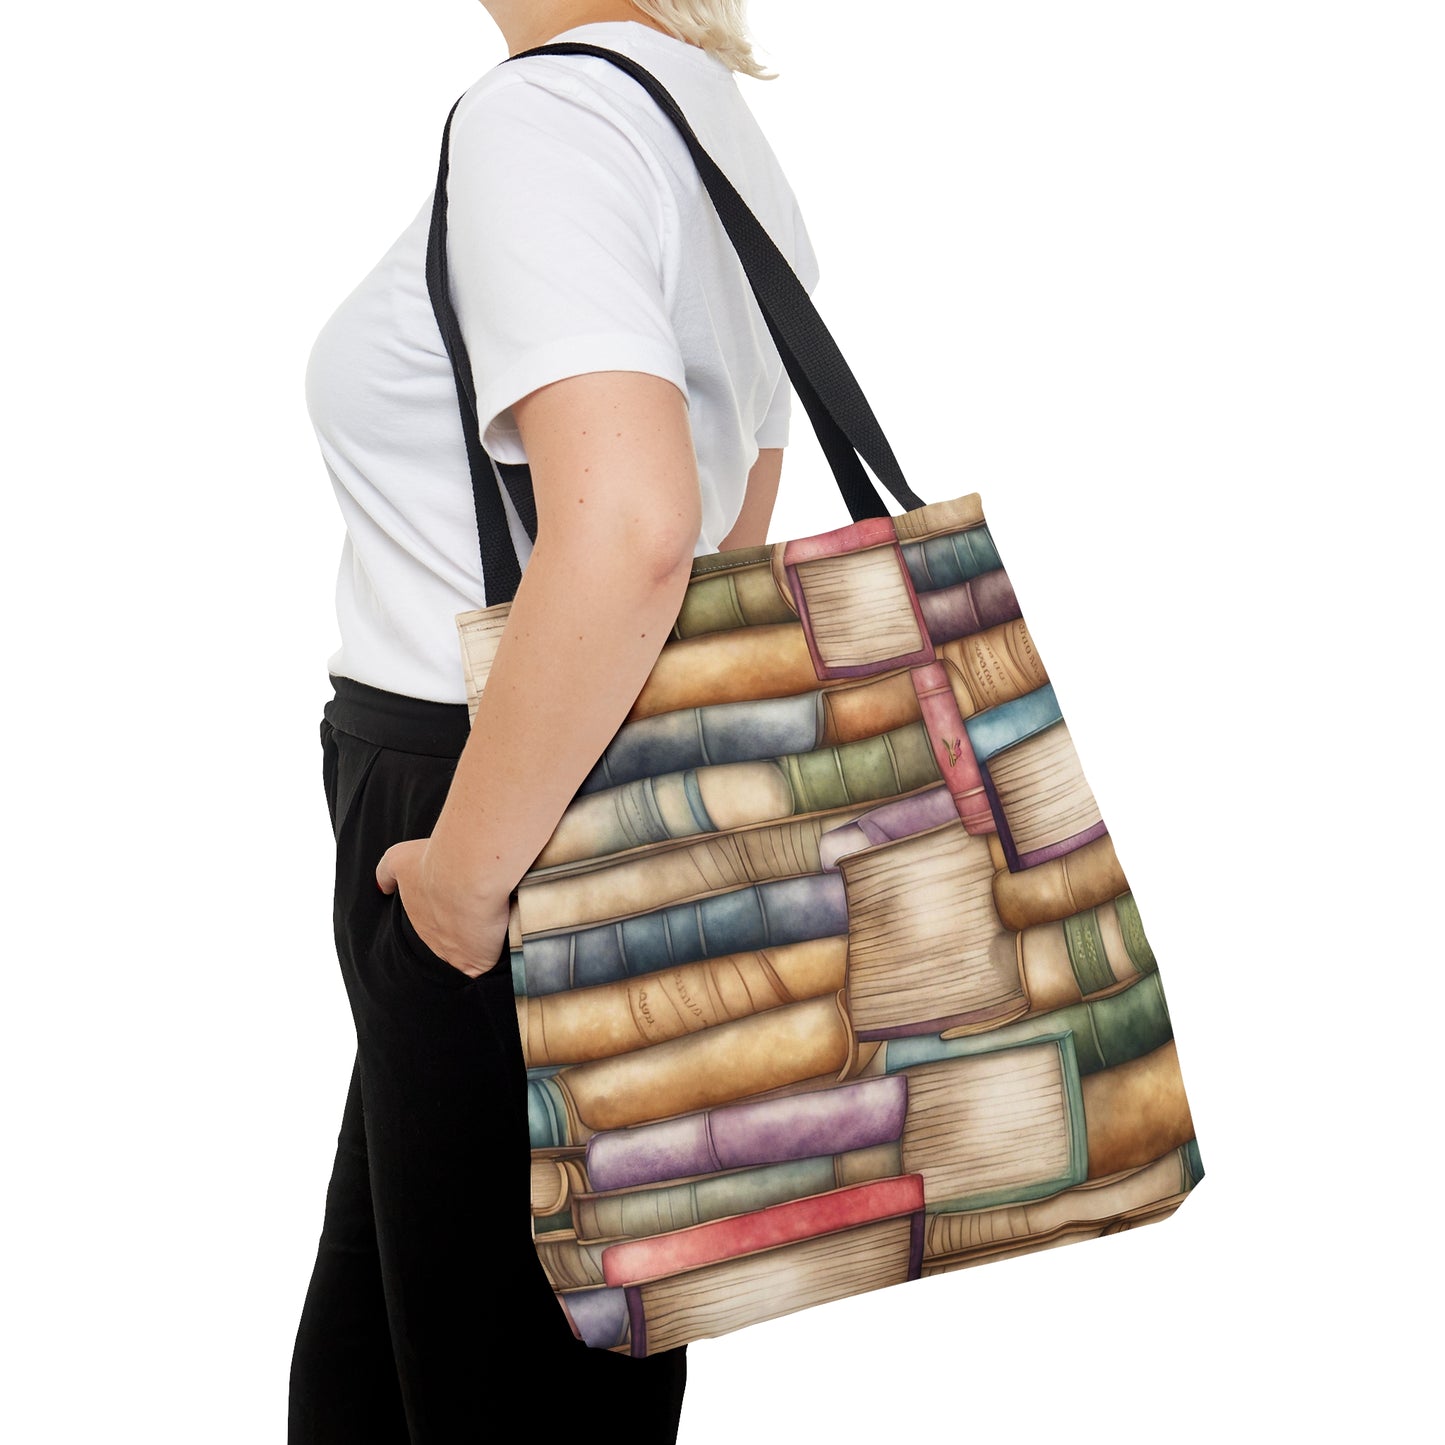 Book Stack Library Tote Bag